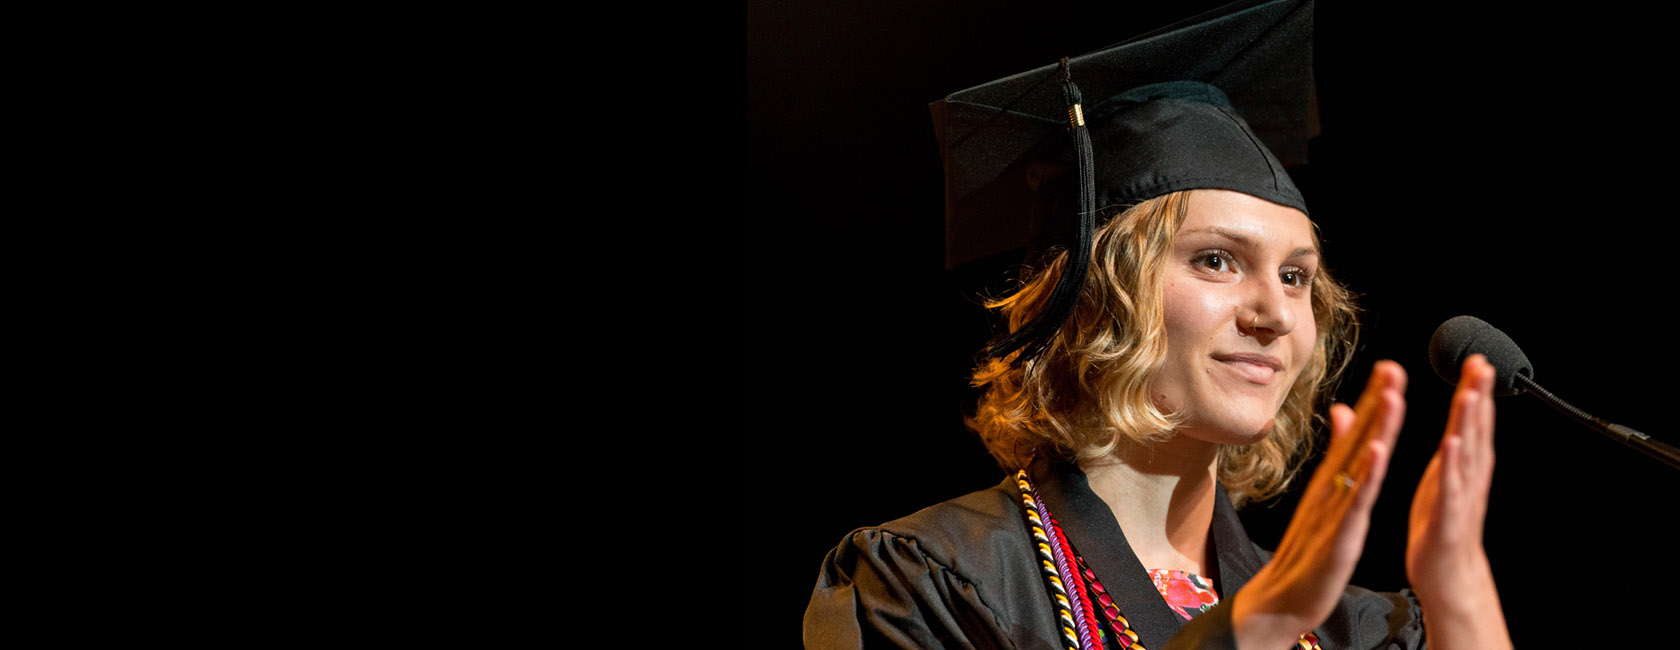 Amanda Seely '15 delivers the student Commencement address at the Tacoma Dome on May 23. (Photo: John Froschauer/PLU)